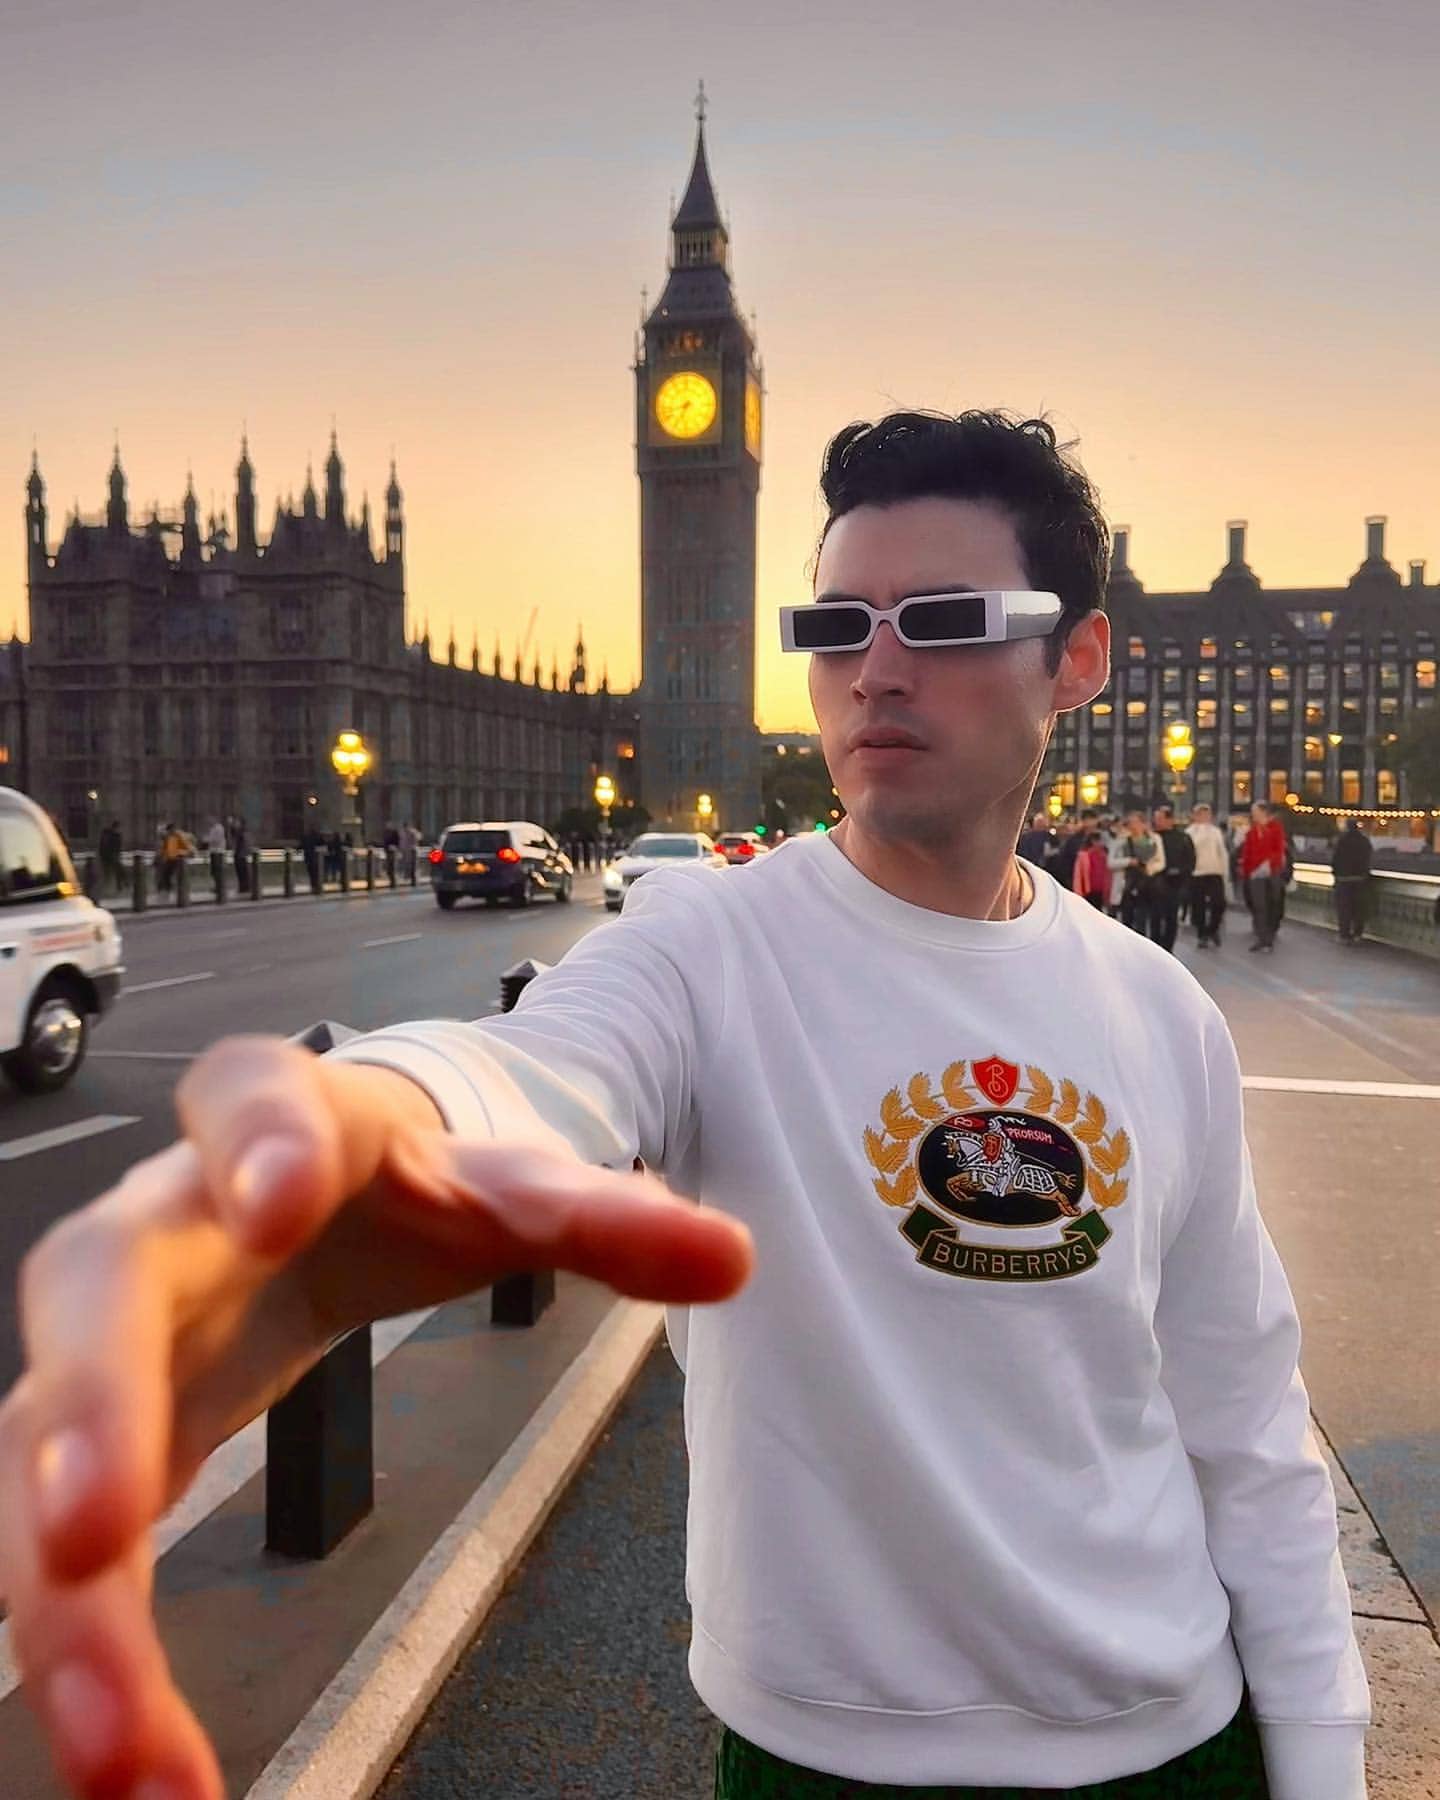 Troy Bronson, Actor, striking a cool pose in a white Burberry outfit and sunglasses, with the stunning sunset-lit Big Ben in the background.